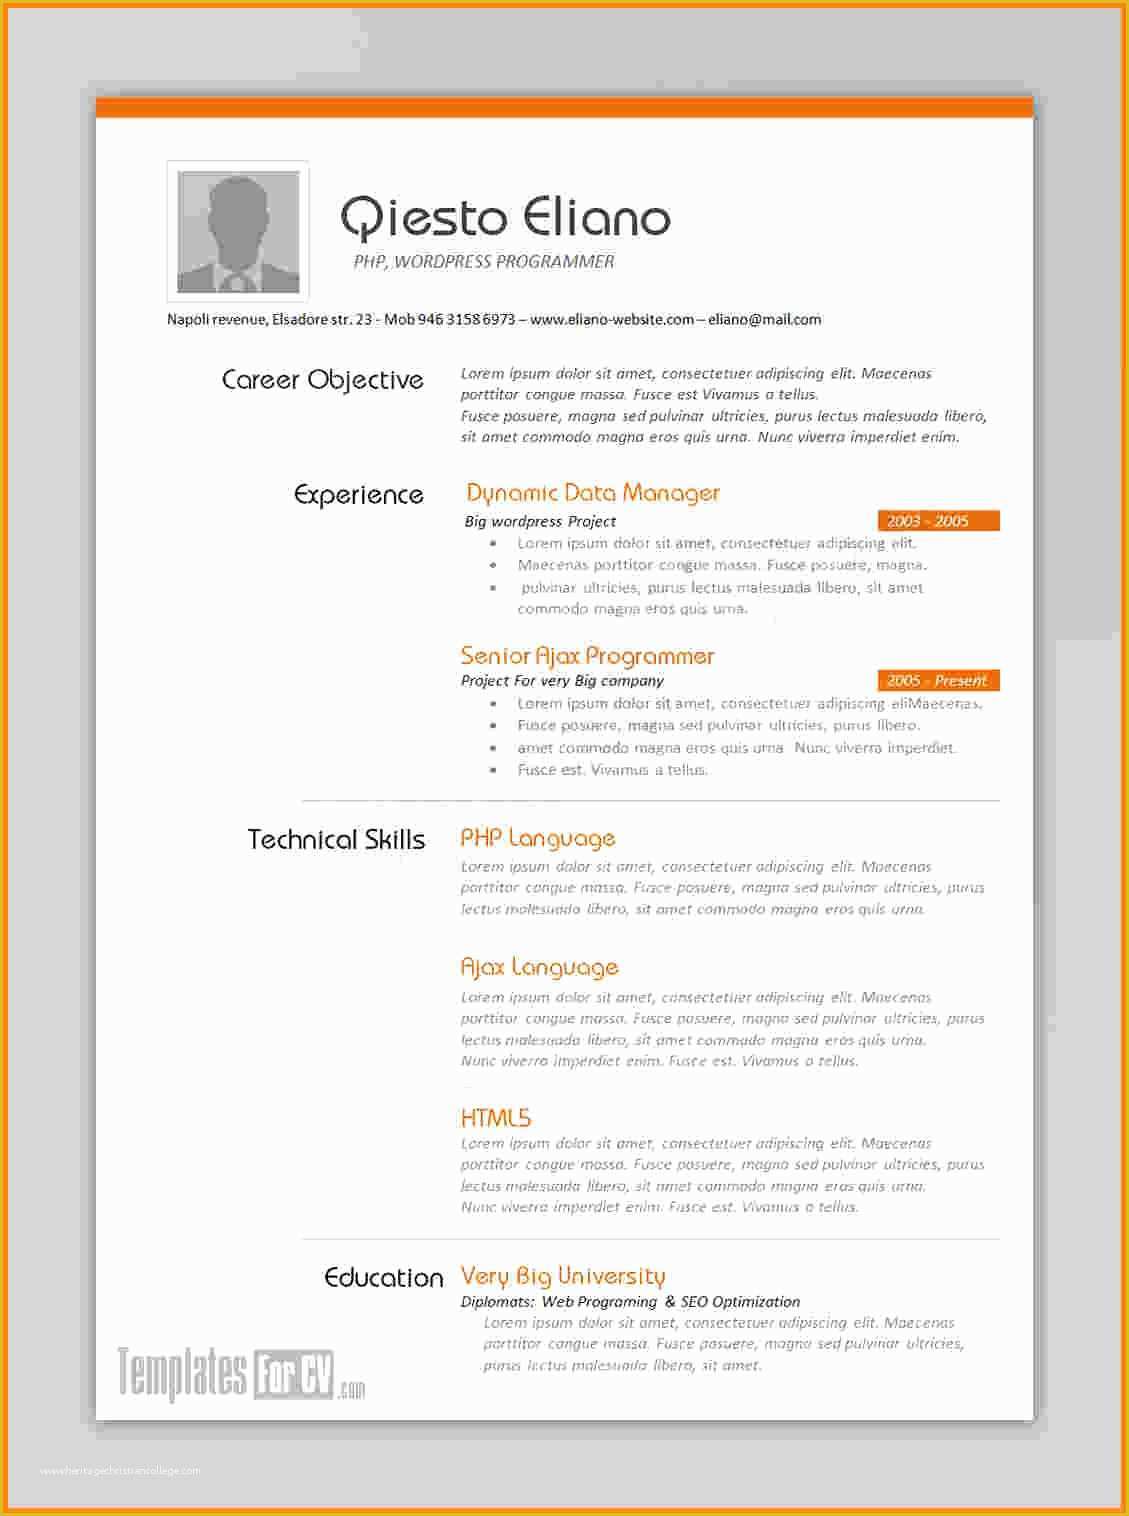 Microsoft Office Word Templates Free Download Of Resume Template Best Free Resume Templates 2019 My